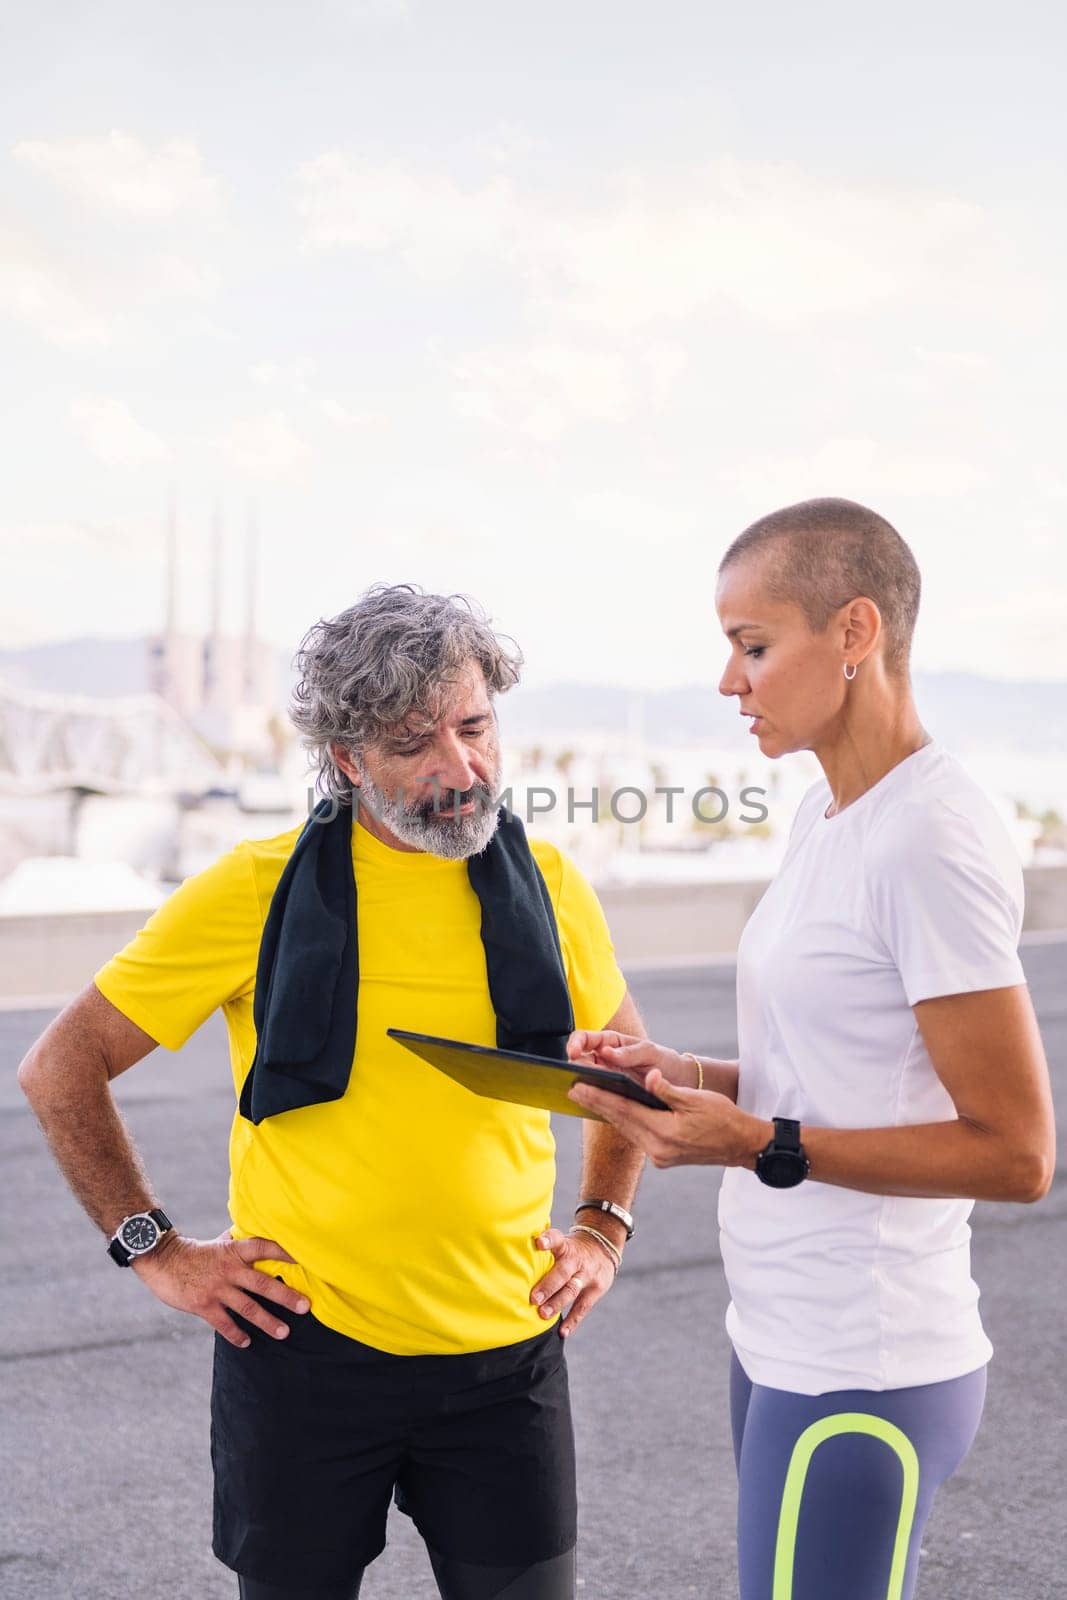 female personal trainer explaining workout with tablet to an elderly sports man, concept of active and healthy lifestyle in middle age, copy space for text